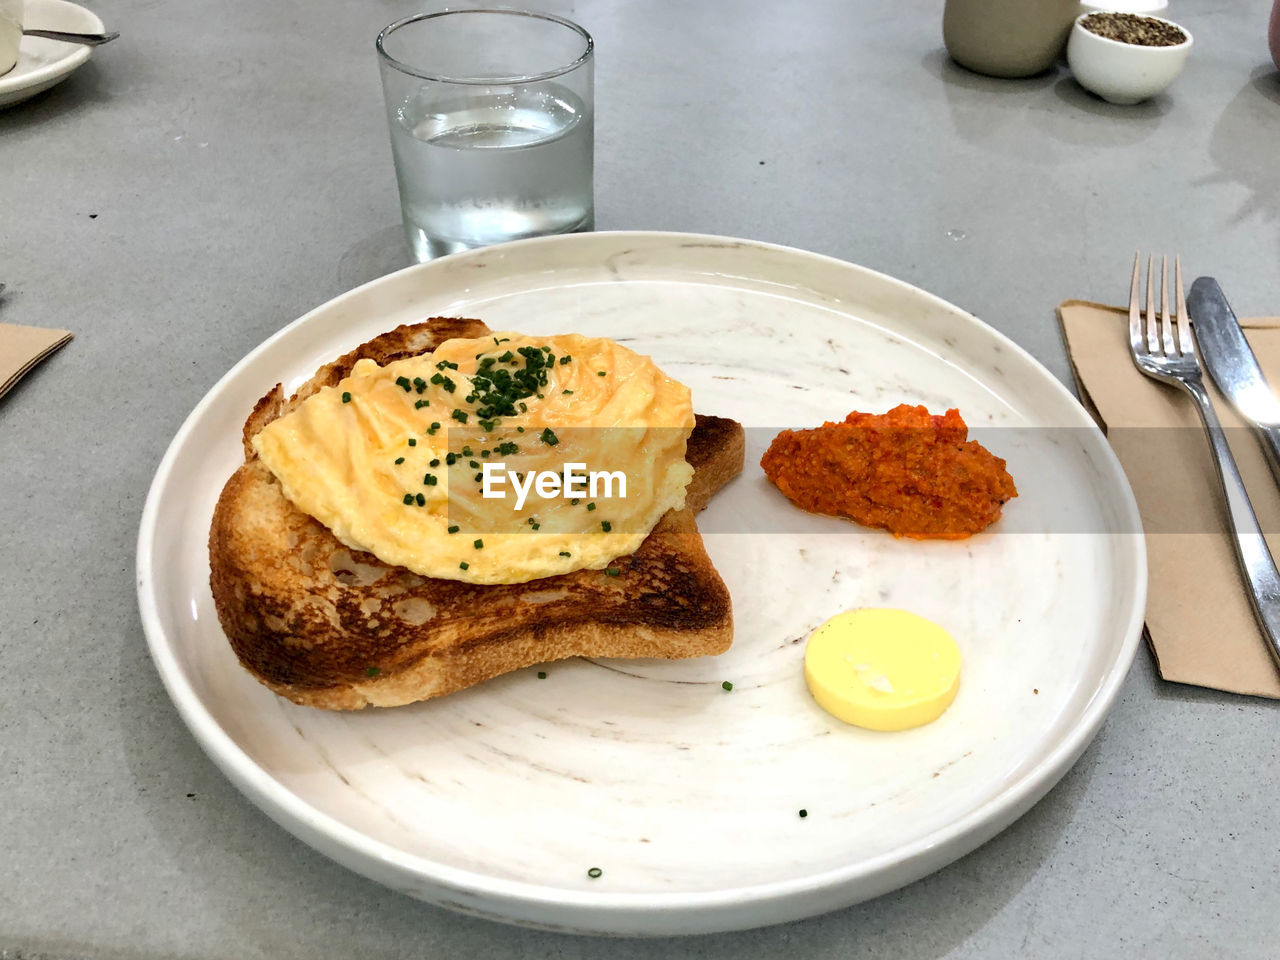 VIEW OF BREAKFAST SERVED ON TABLE